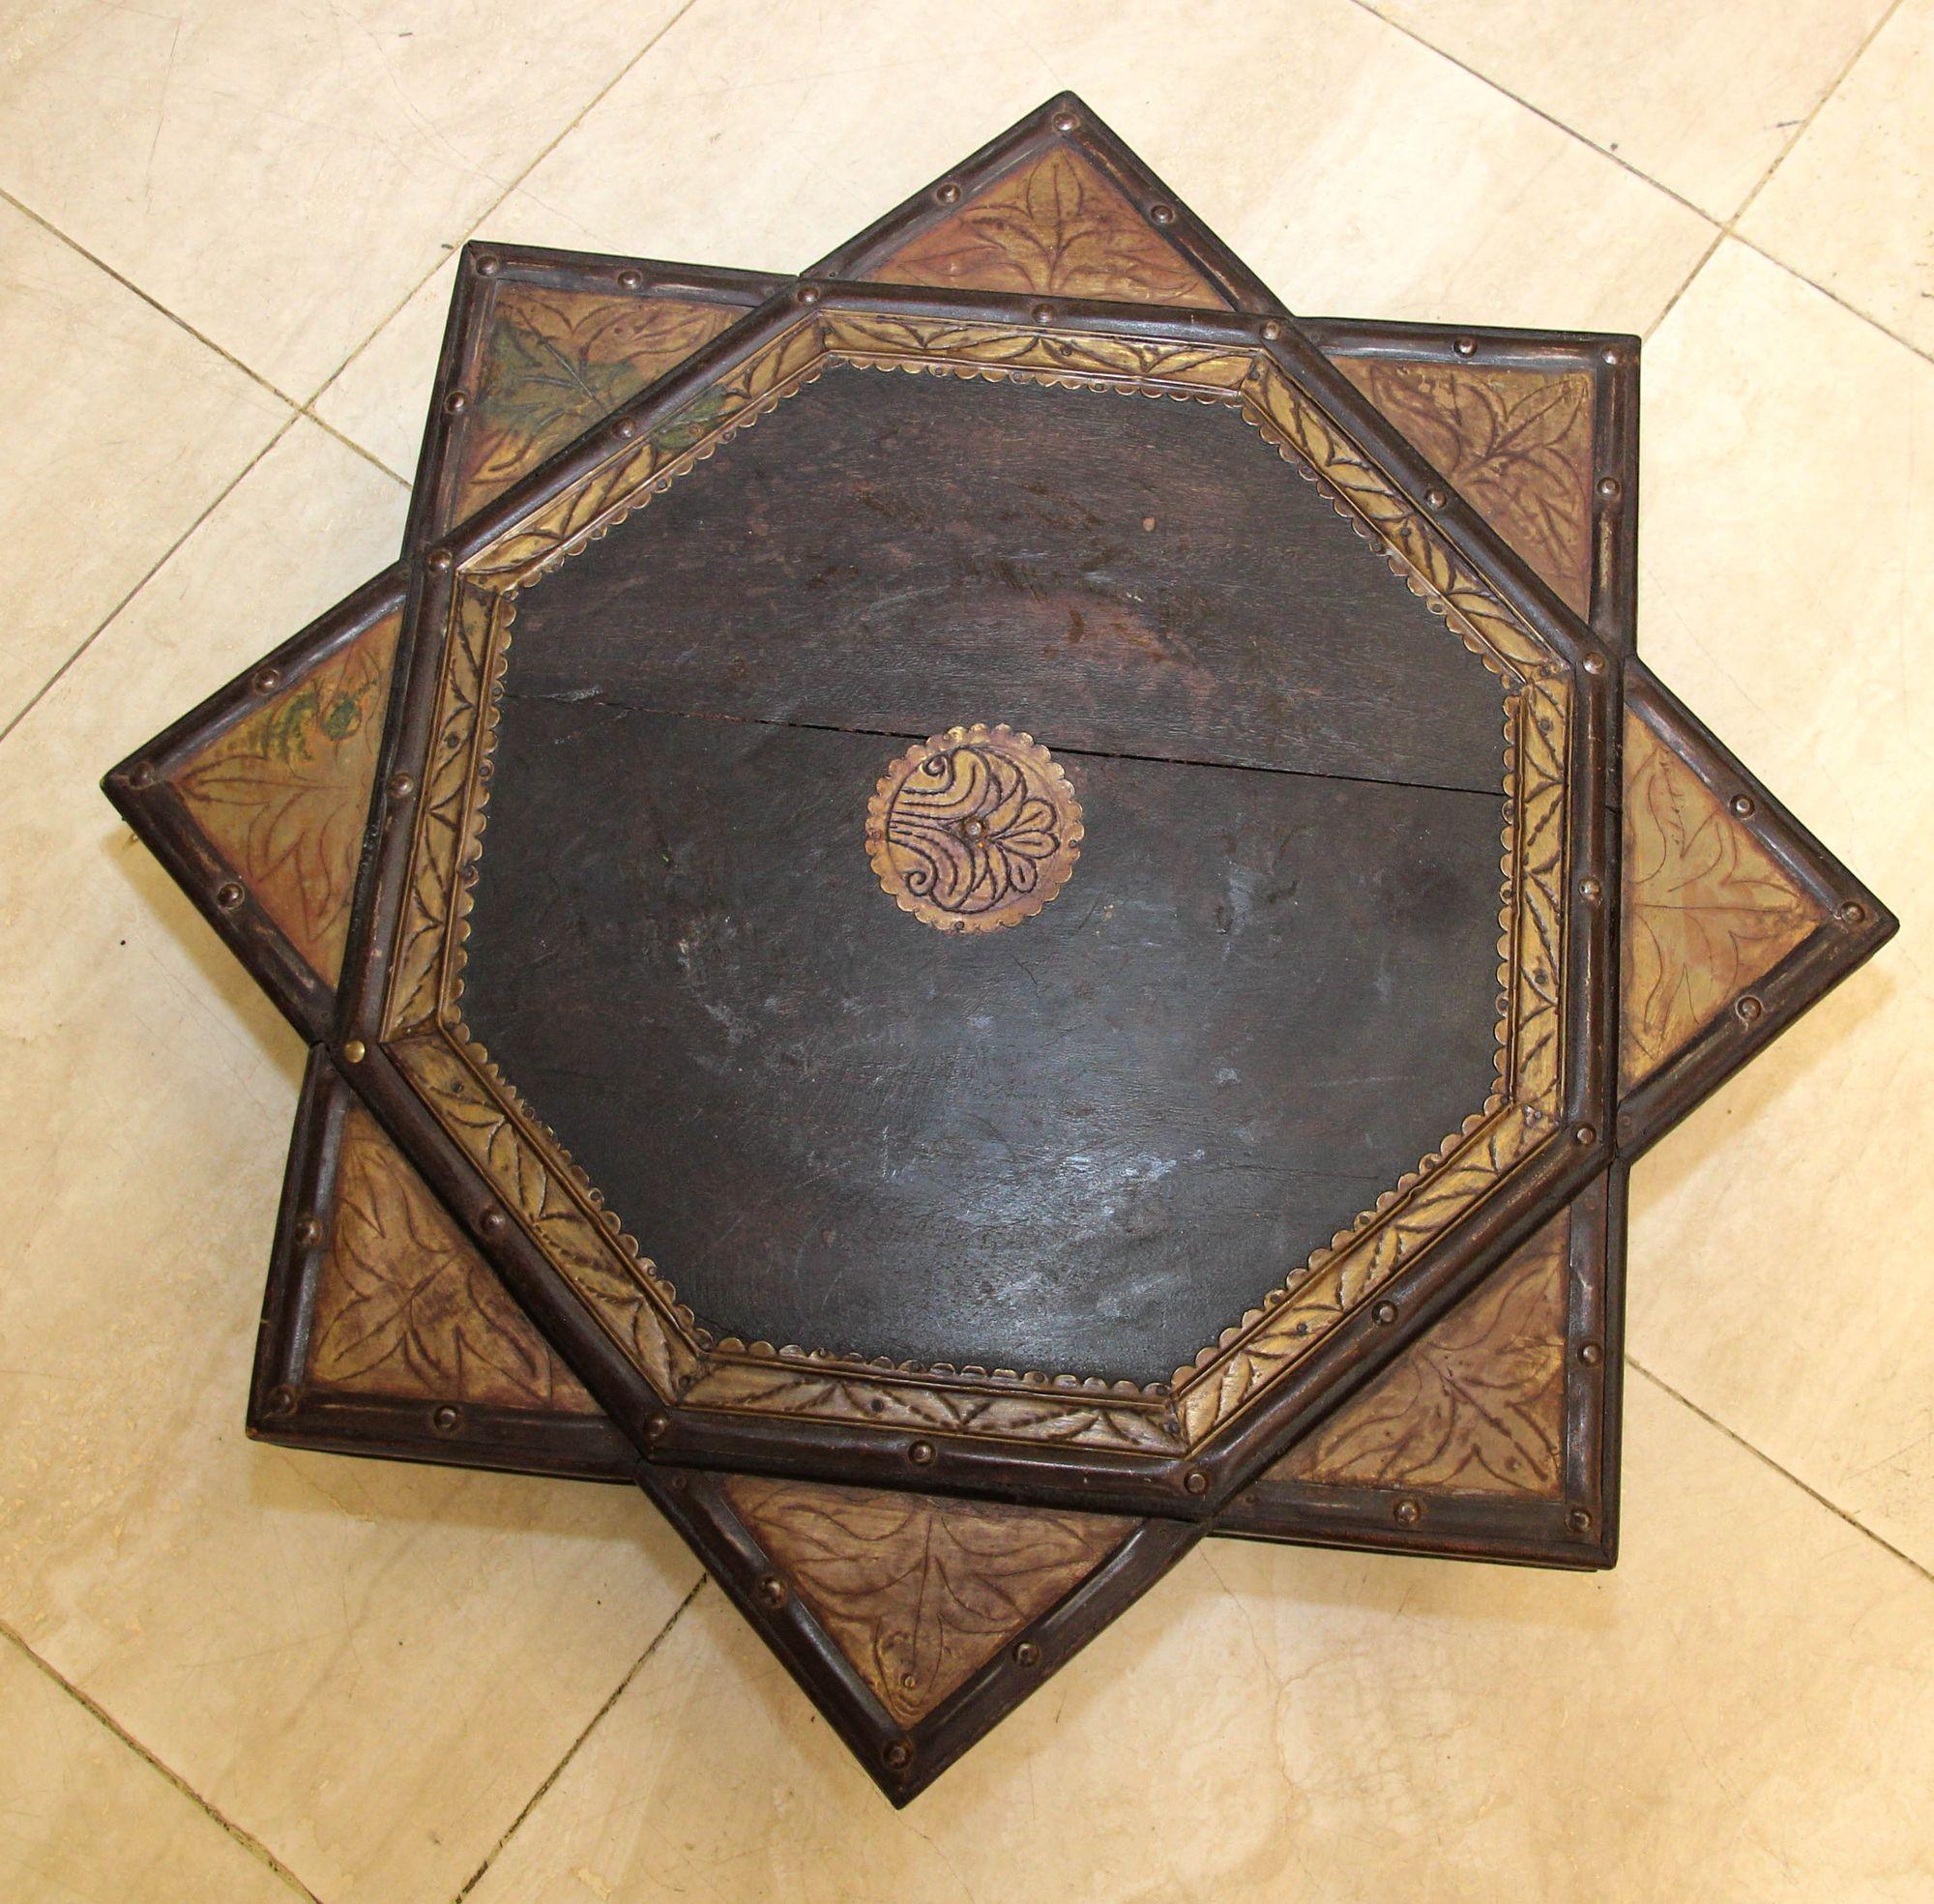 Indian wooden low coffee table in the shape of 8 pointed star decorated with embossed brass accents and nails.
This teak bajot low table from Rajasthan has a gorgeous rich patina and lots of character with beautiful signs of age and use.
Classic